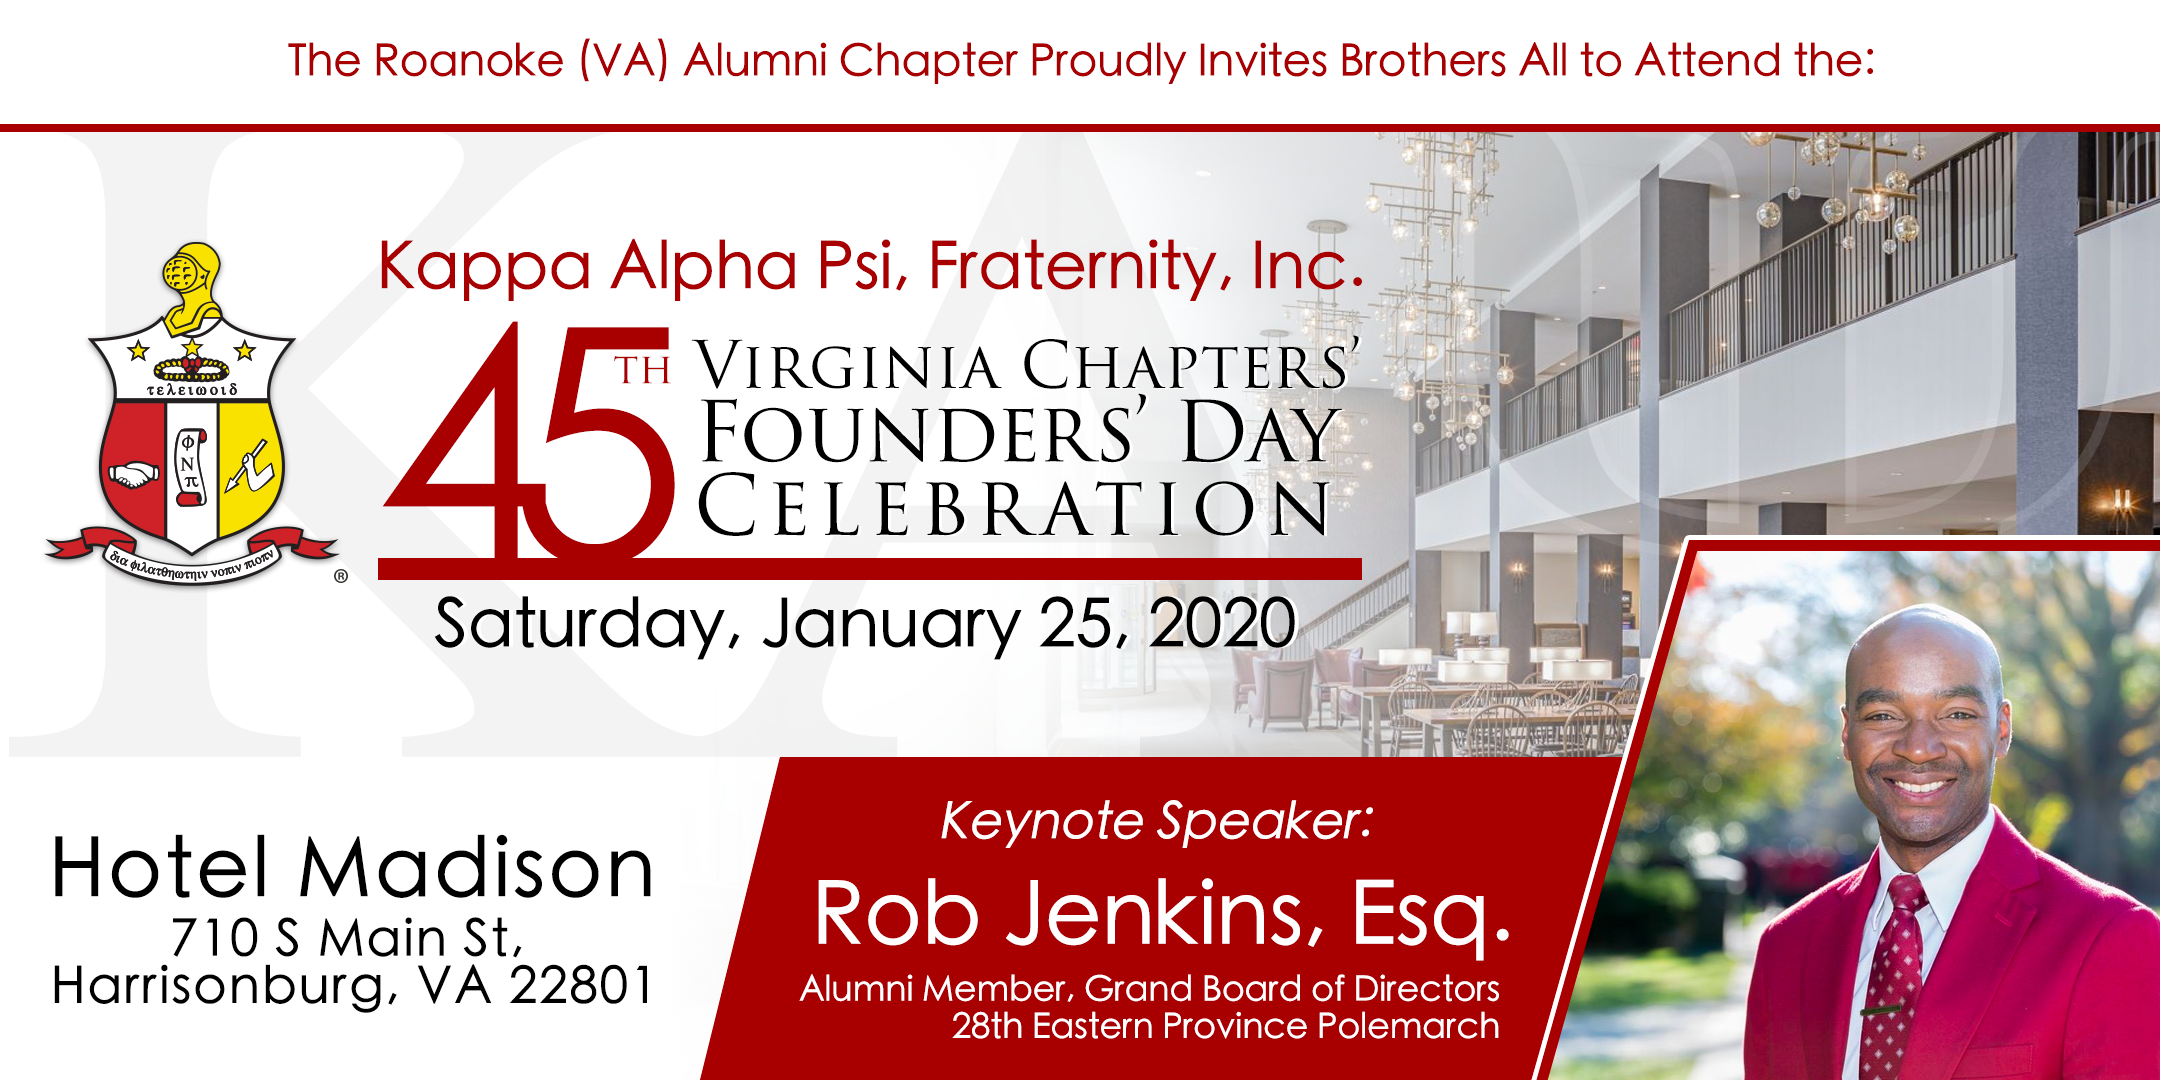 45th Virginia Chapters’ Founders’ Day Celebration